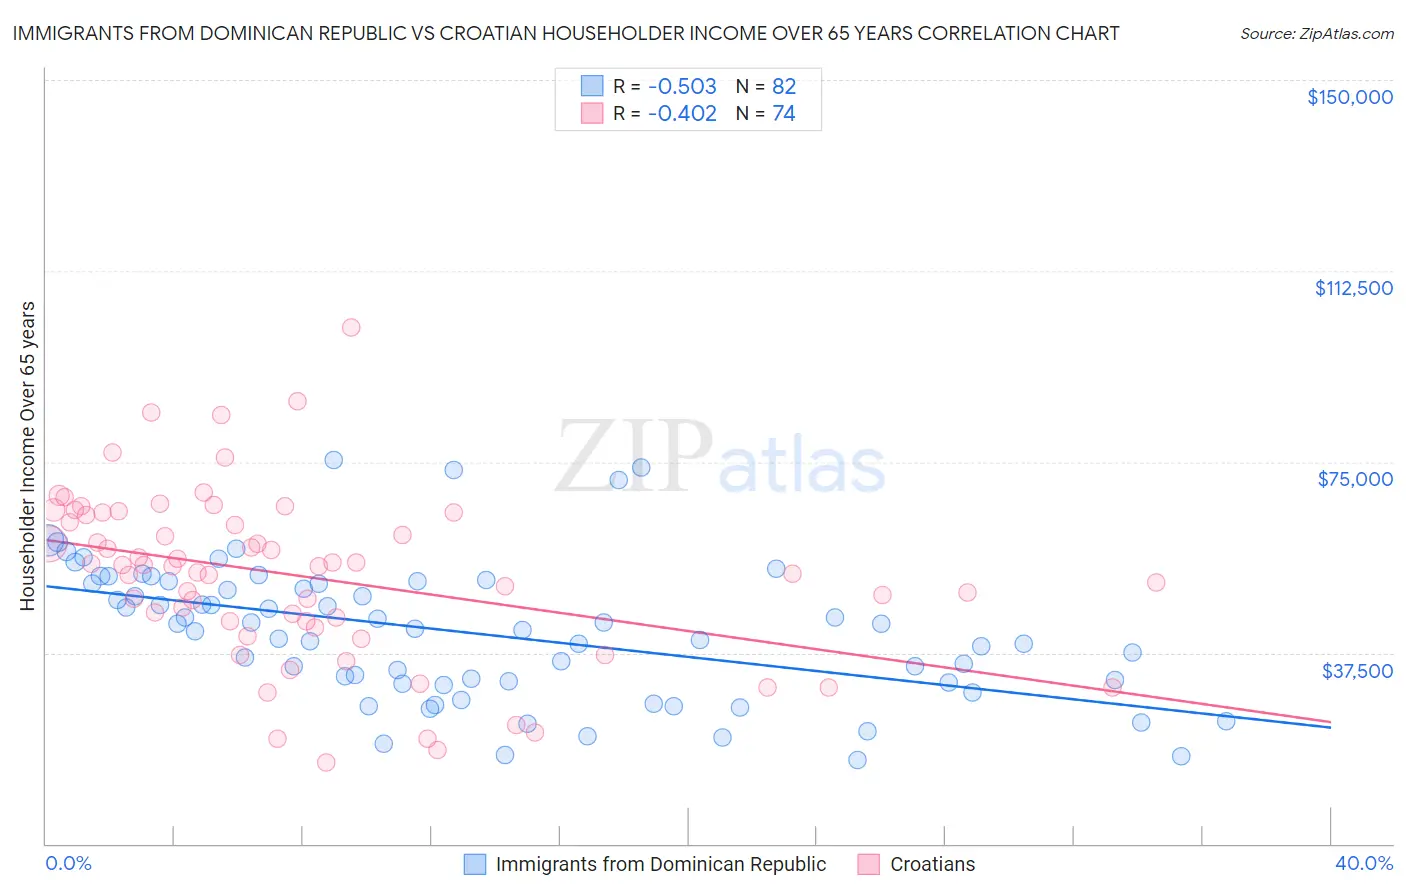 Immigrants from Dominican Republic vs Croatian Householder Income Over 65 years